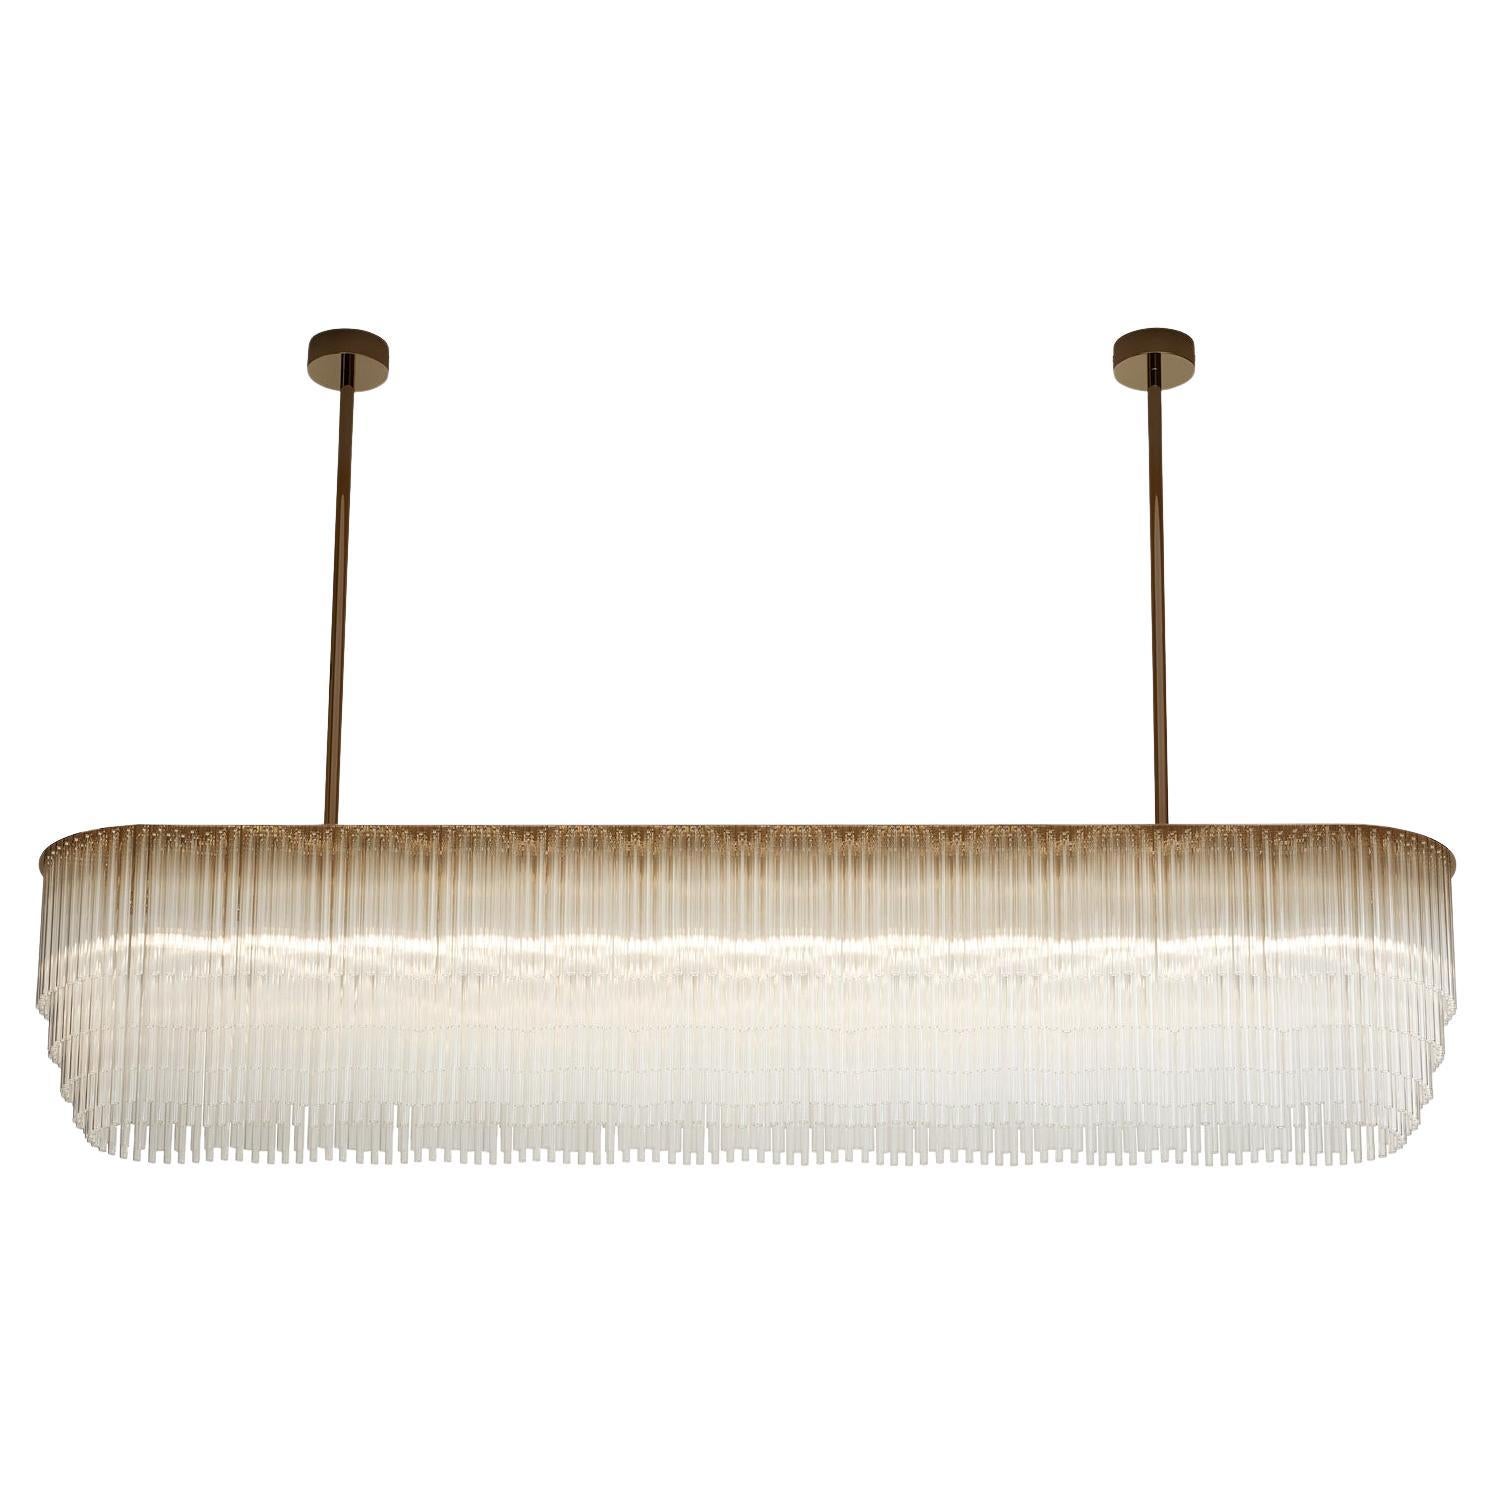 Linear Chandelier 1588mm / 62.5" in Brass-based Bronze with Tiered Glass Profile For Sale